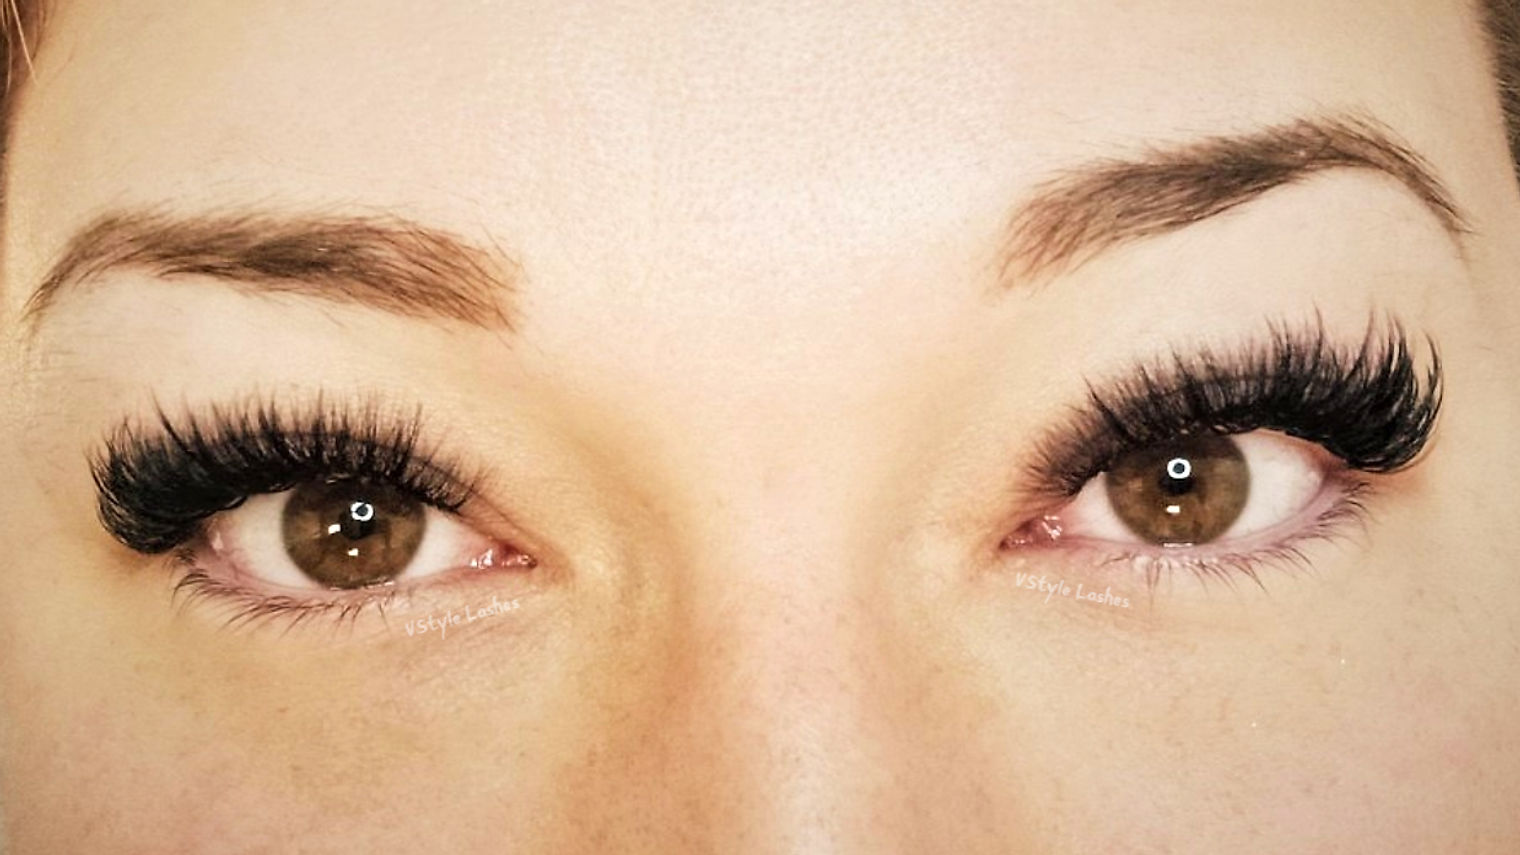 VStyle Lashes Videos